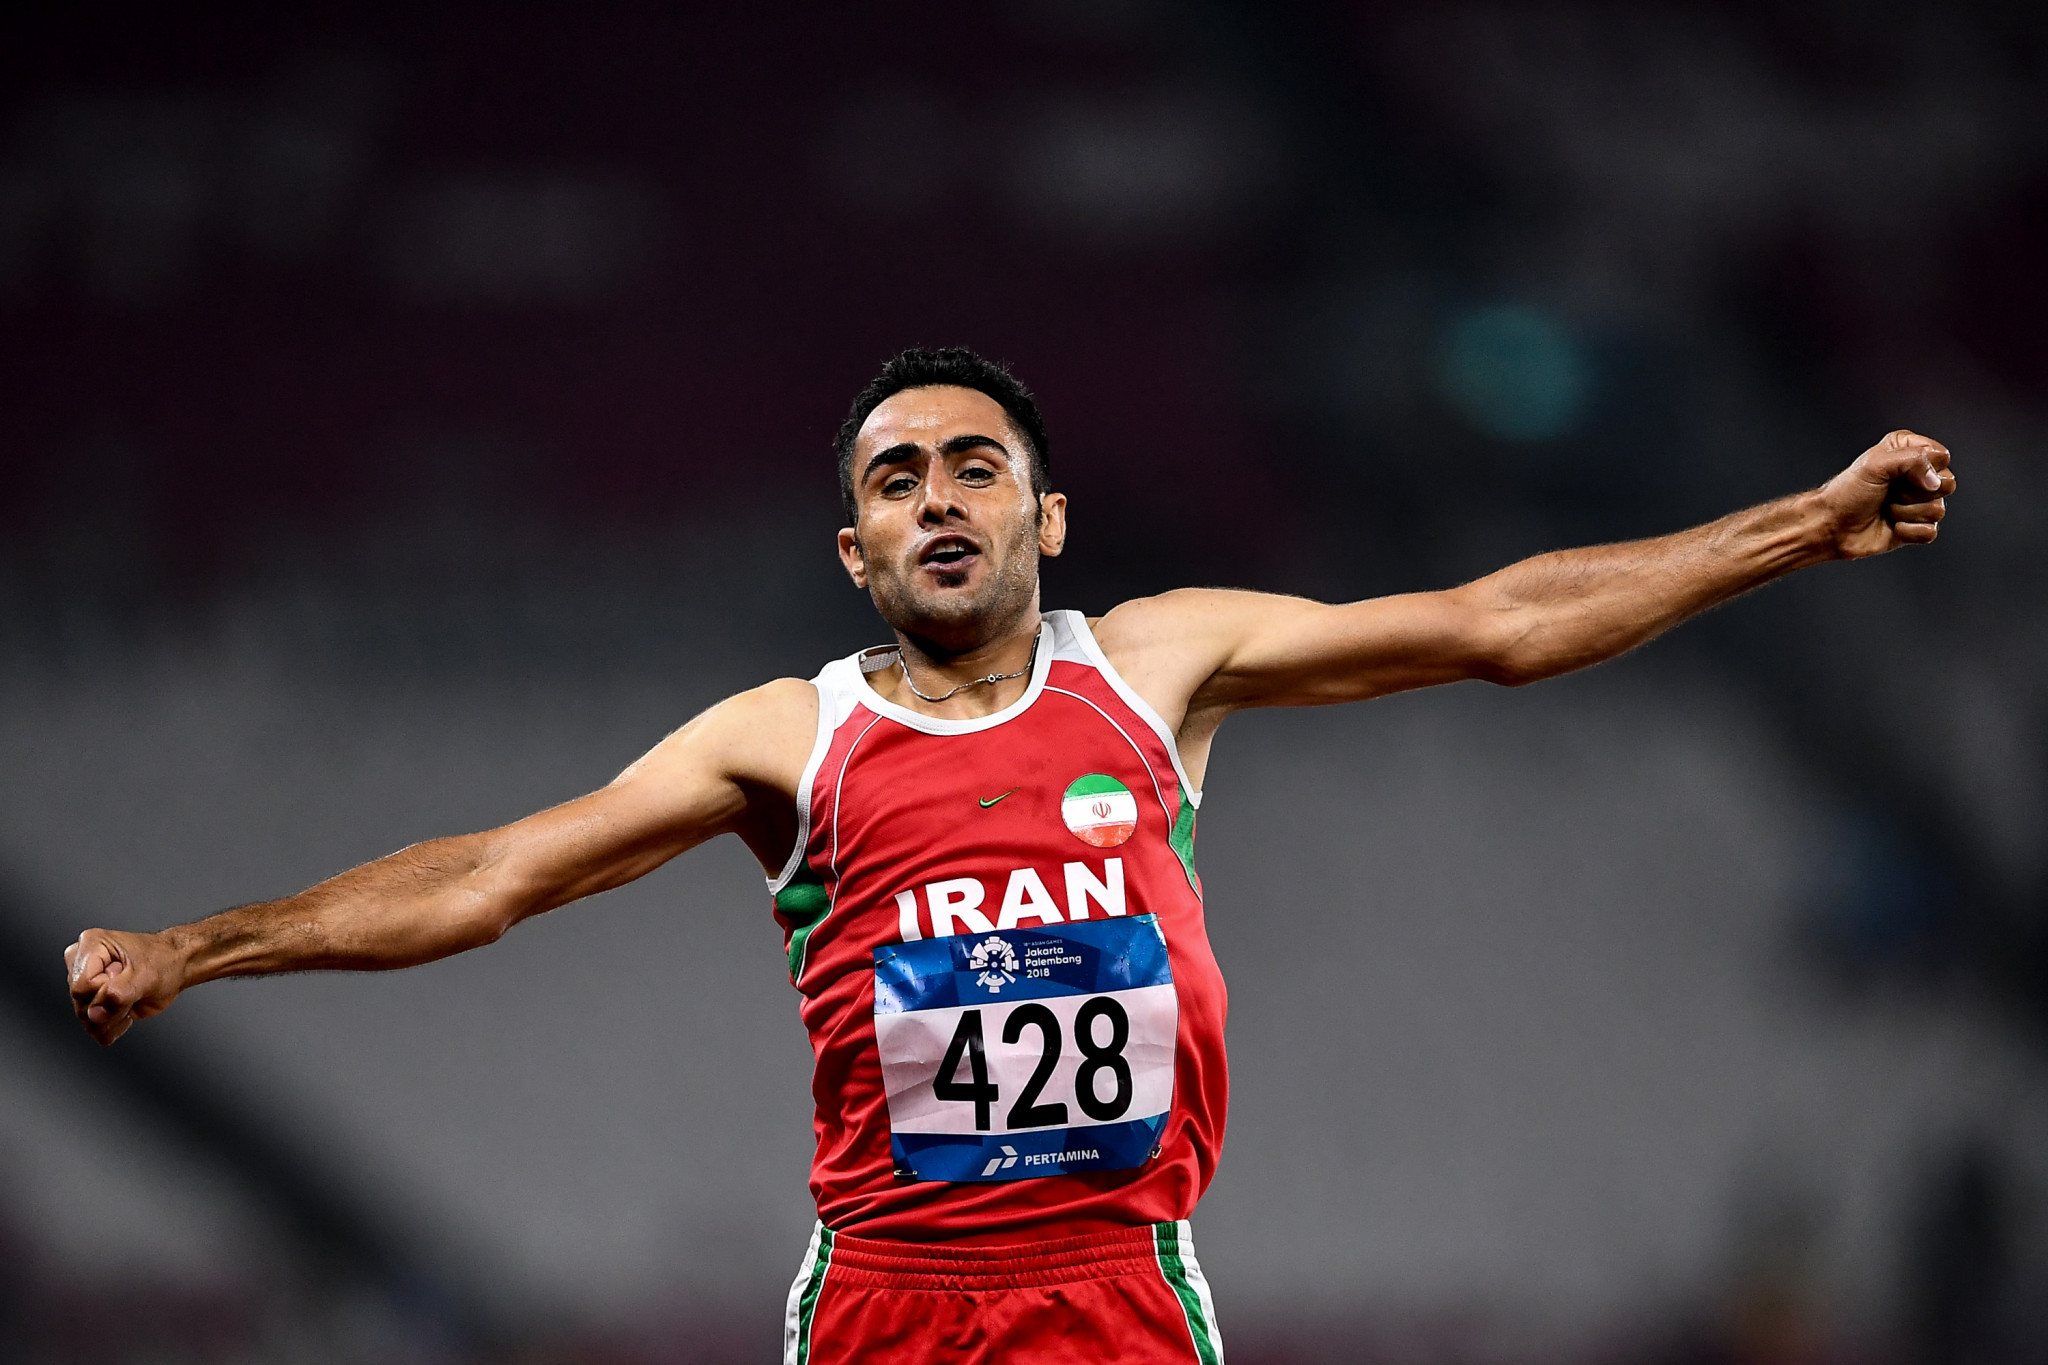 Iranian Asian Games steeplechase champion Keyhani receives provisional suspension for doping violation